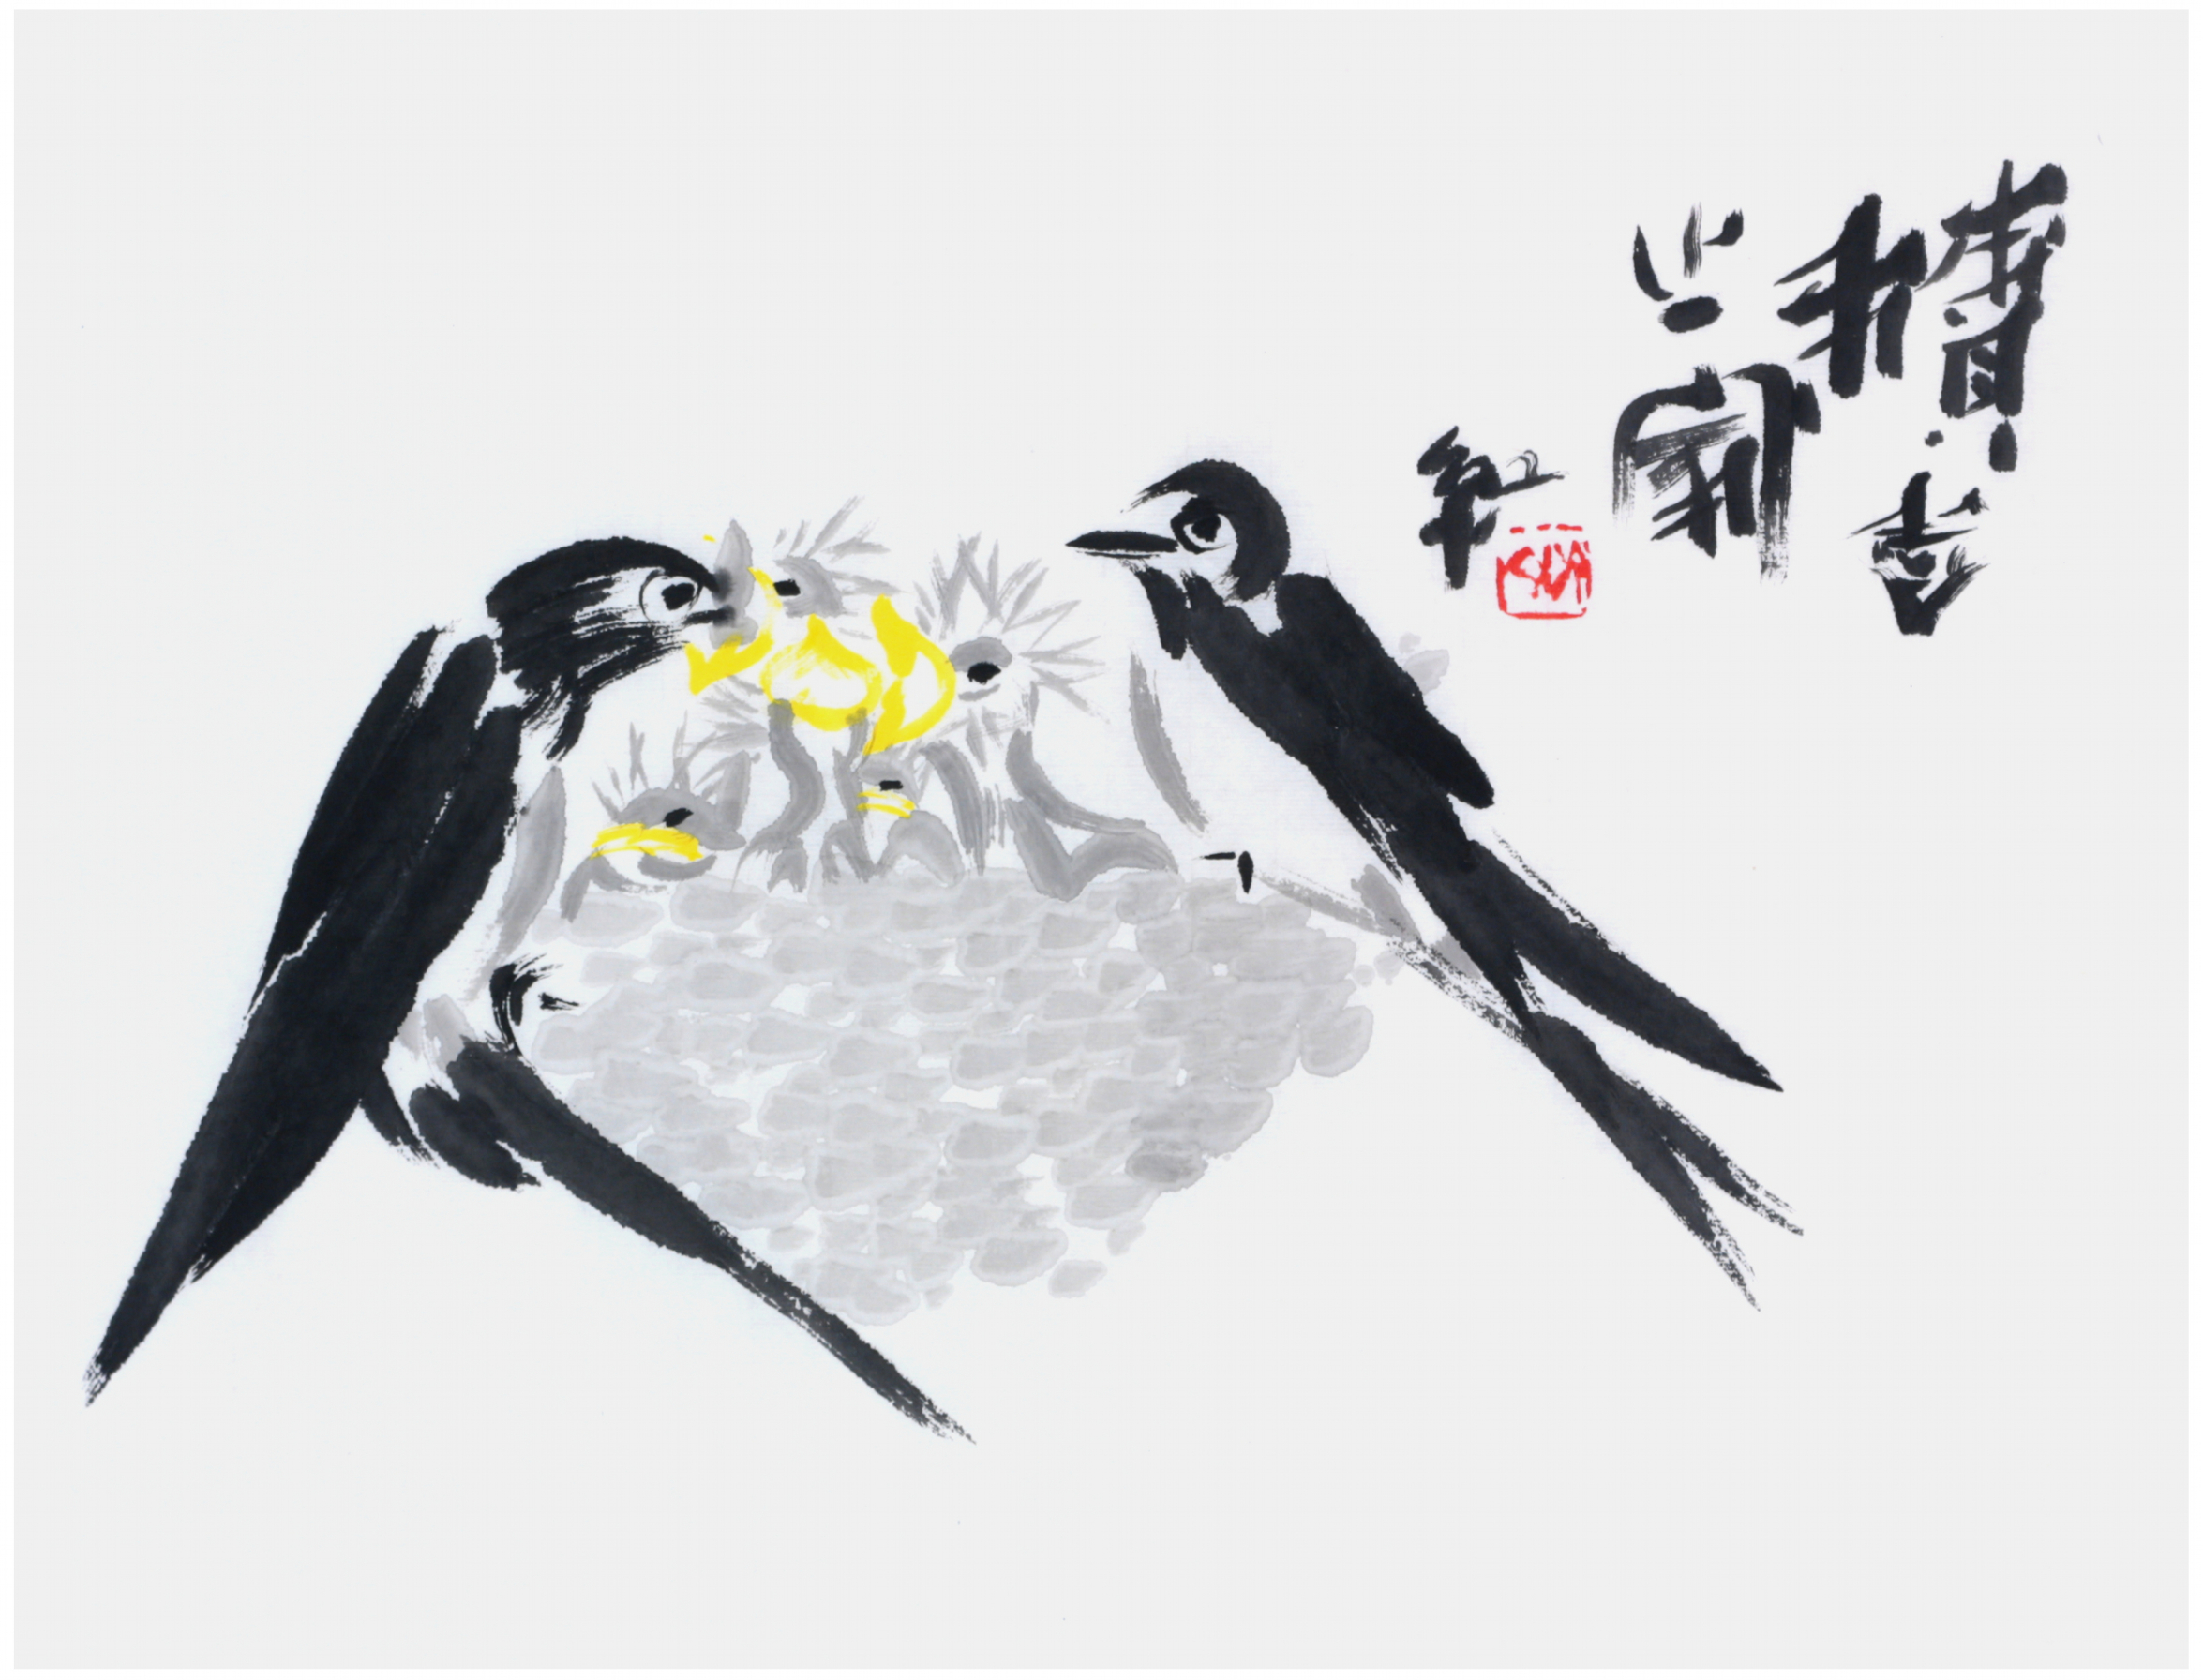 Sai Koh (Qi Hong)’s freehand brushwork Chinese painting (aka, bird-and-flower painting,  literati painting,  ink wash painting, ink painting, ink brush painting): Swallow Families and Nest, 46×34cm, ink & color on Mian Liao Mian Lian Xuan paper